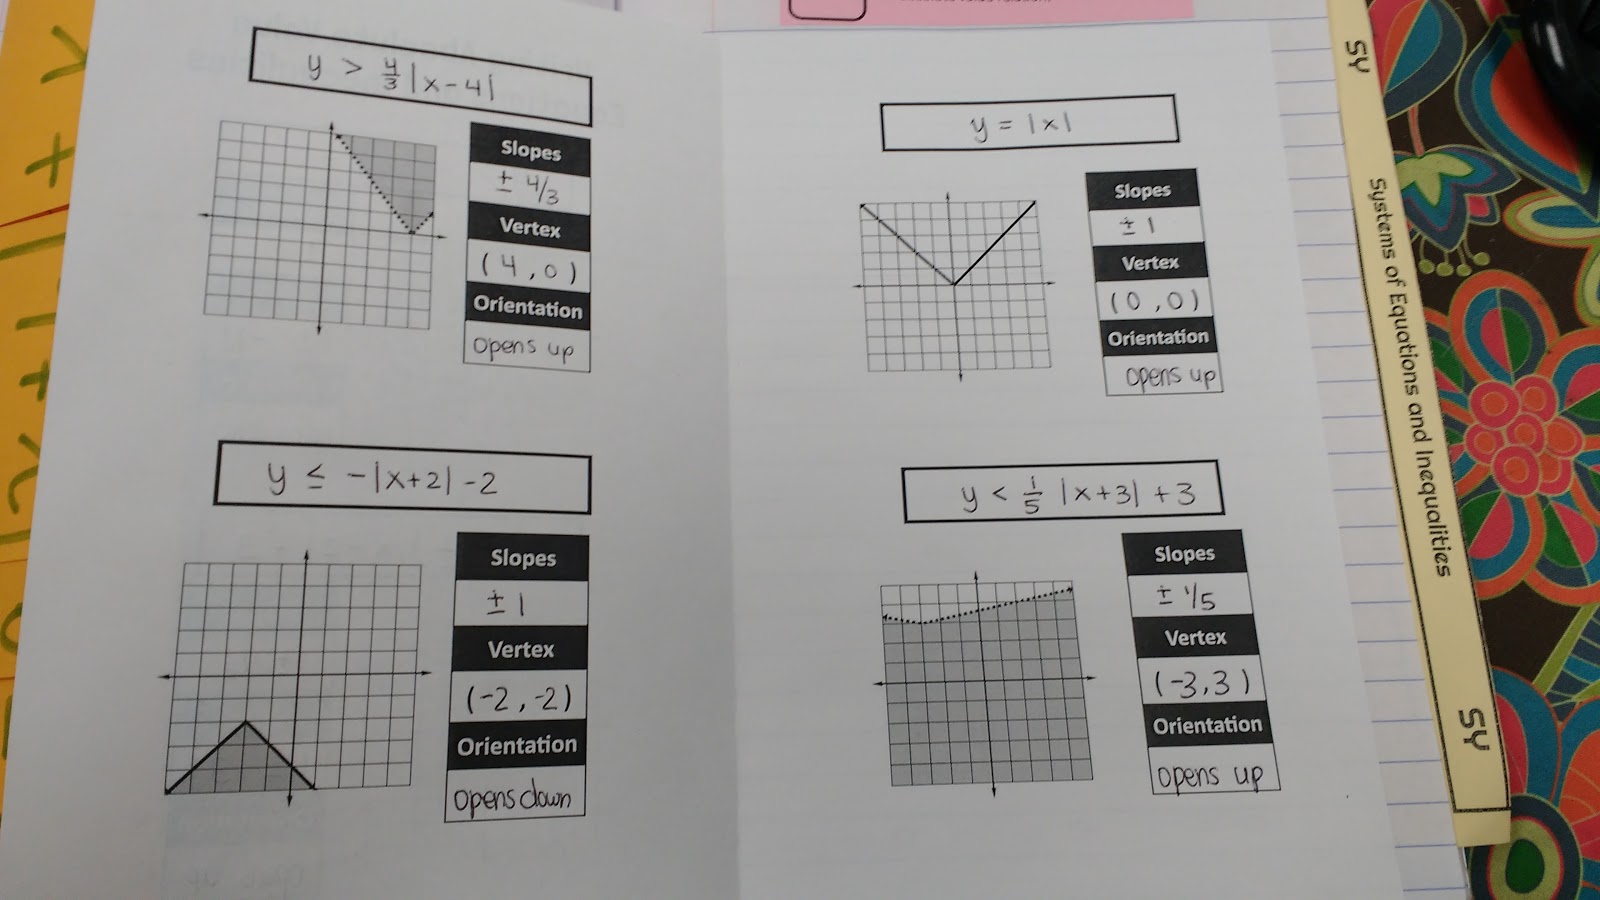 Writing Absolute Value Equations and Inequalities Foldable